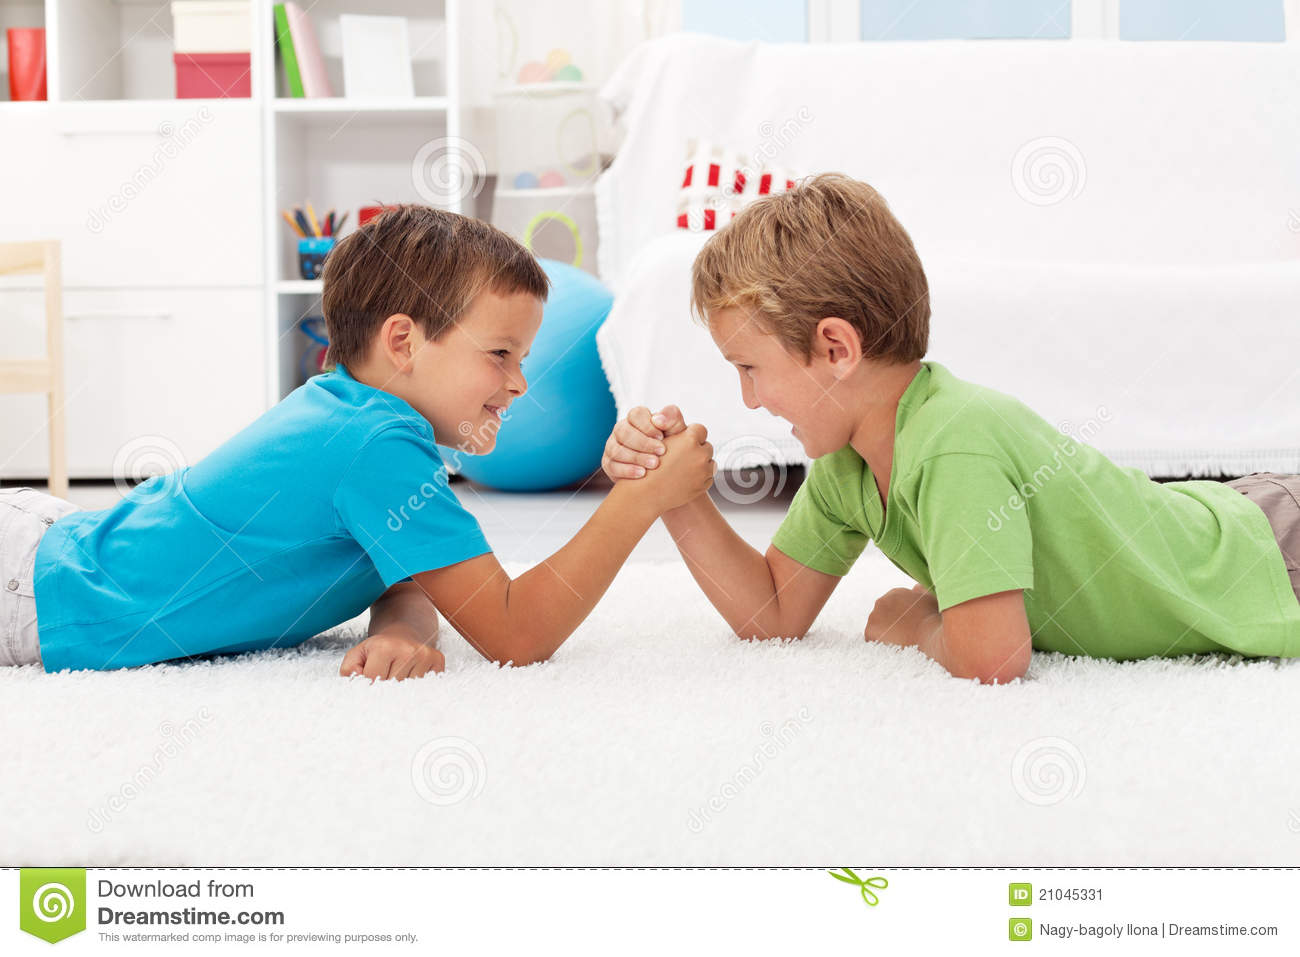 Boys Arm Wrestling In The Kids Room Stock Image   Image  21045331